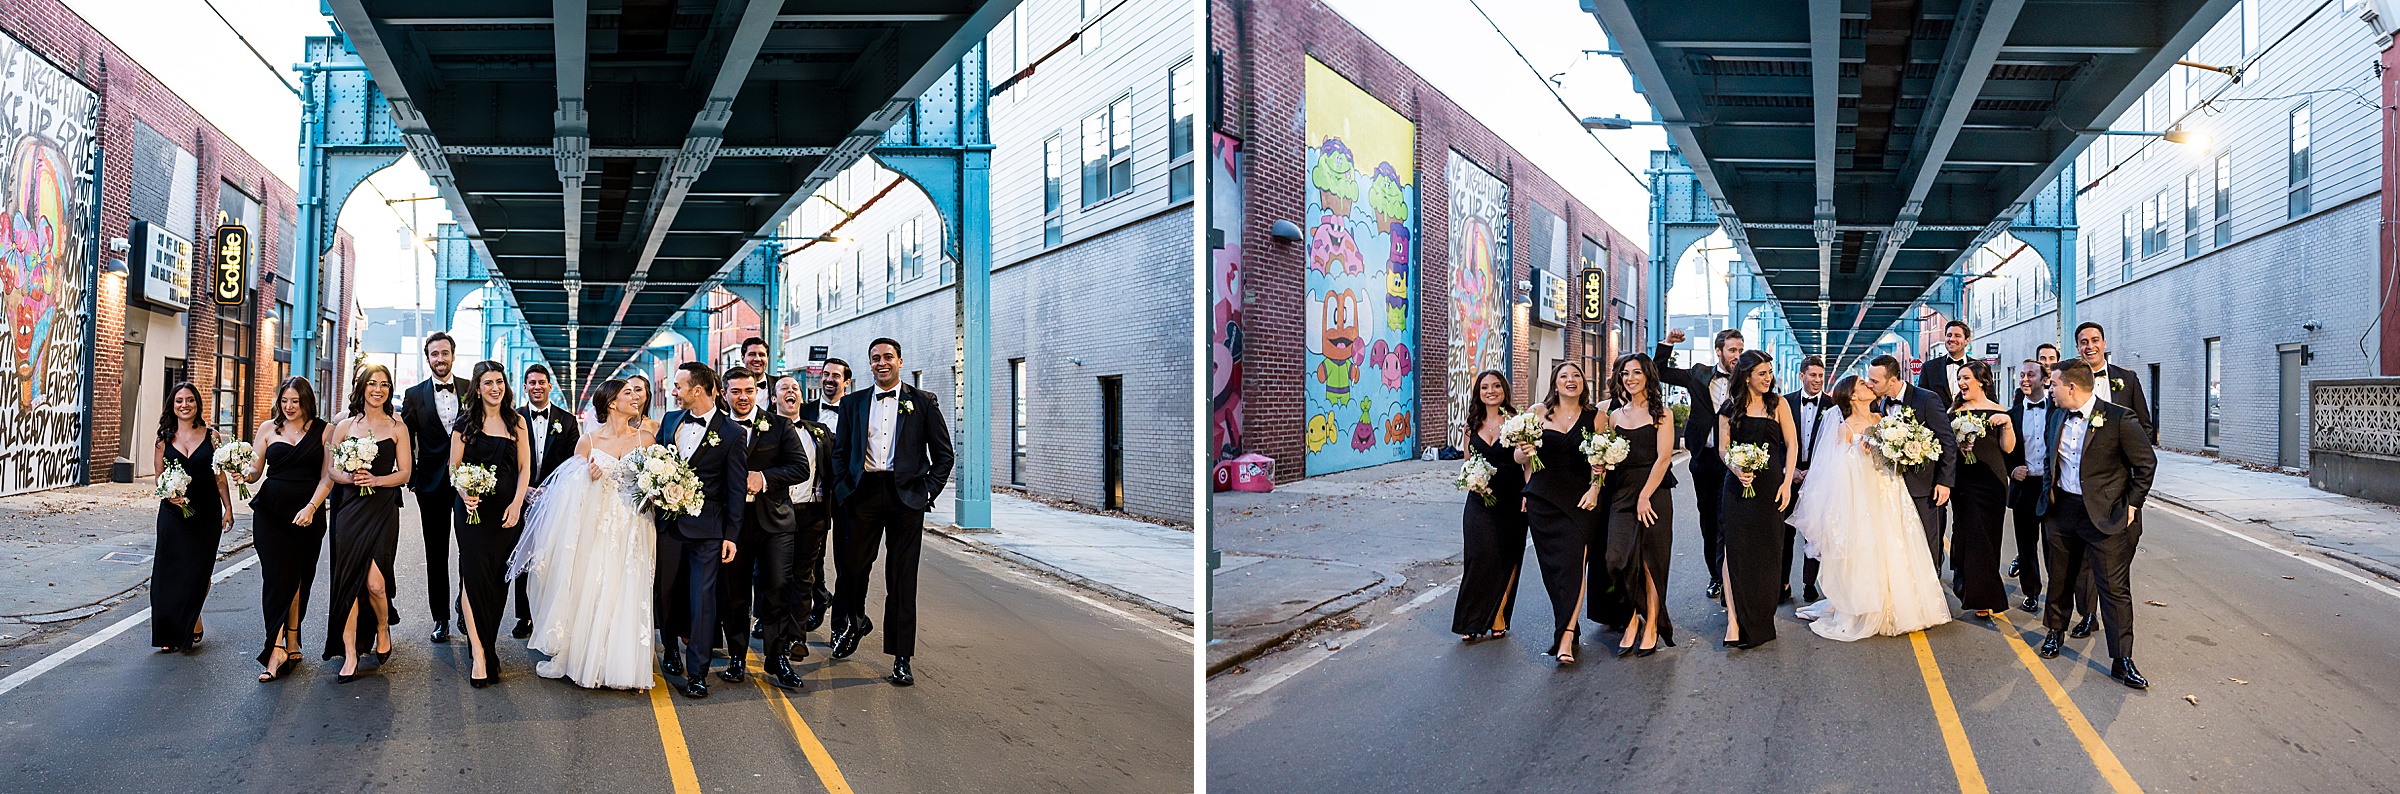 Lilah Events planned a wedding party posing for a photo in an alleyway.